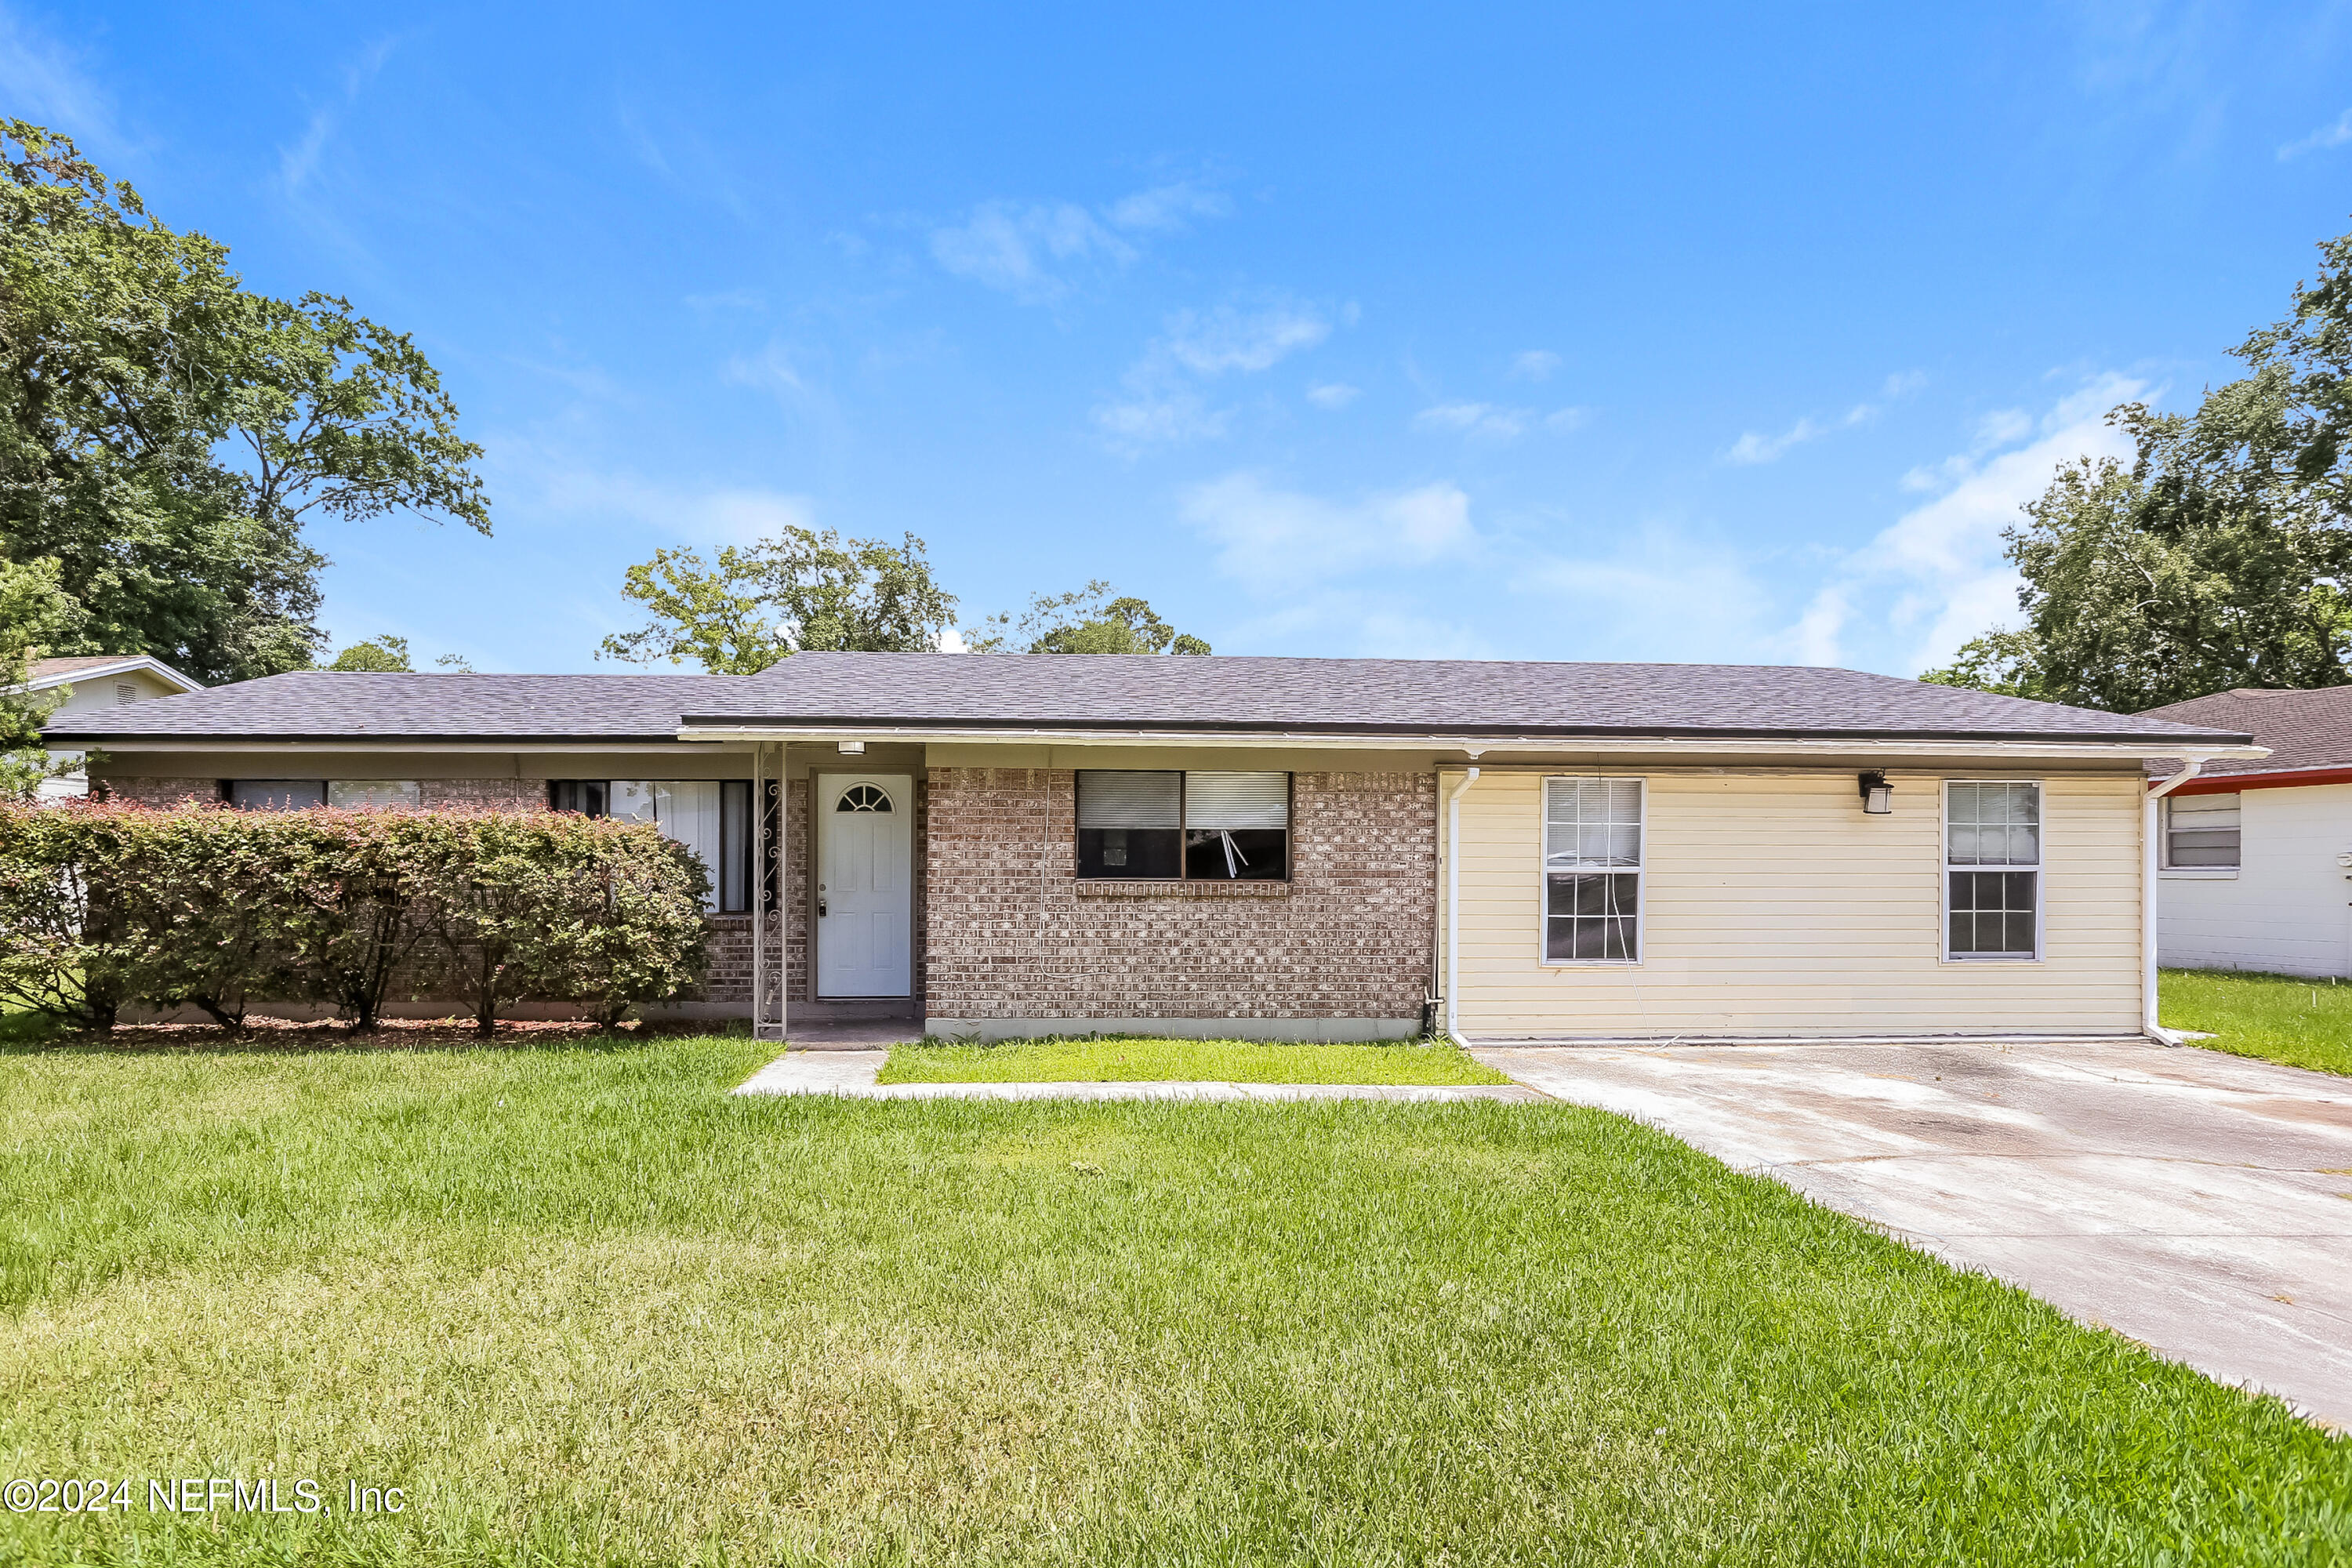 Jacksonville, FL home for sale located at 749 Perryman Lane W, Jacksonville, FL 32221